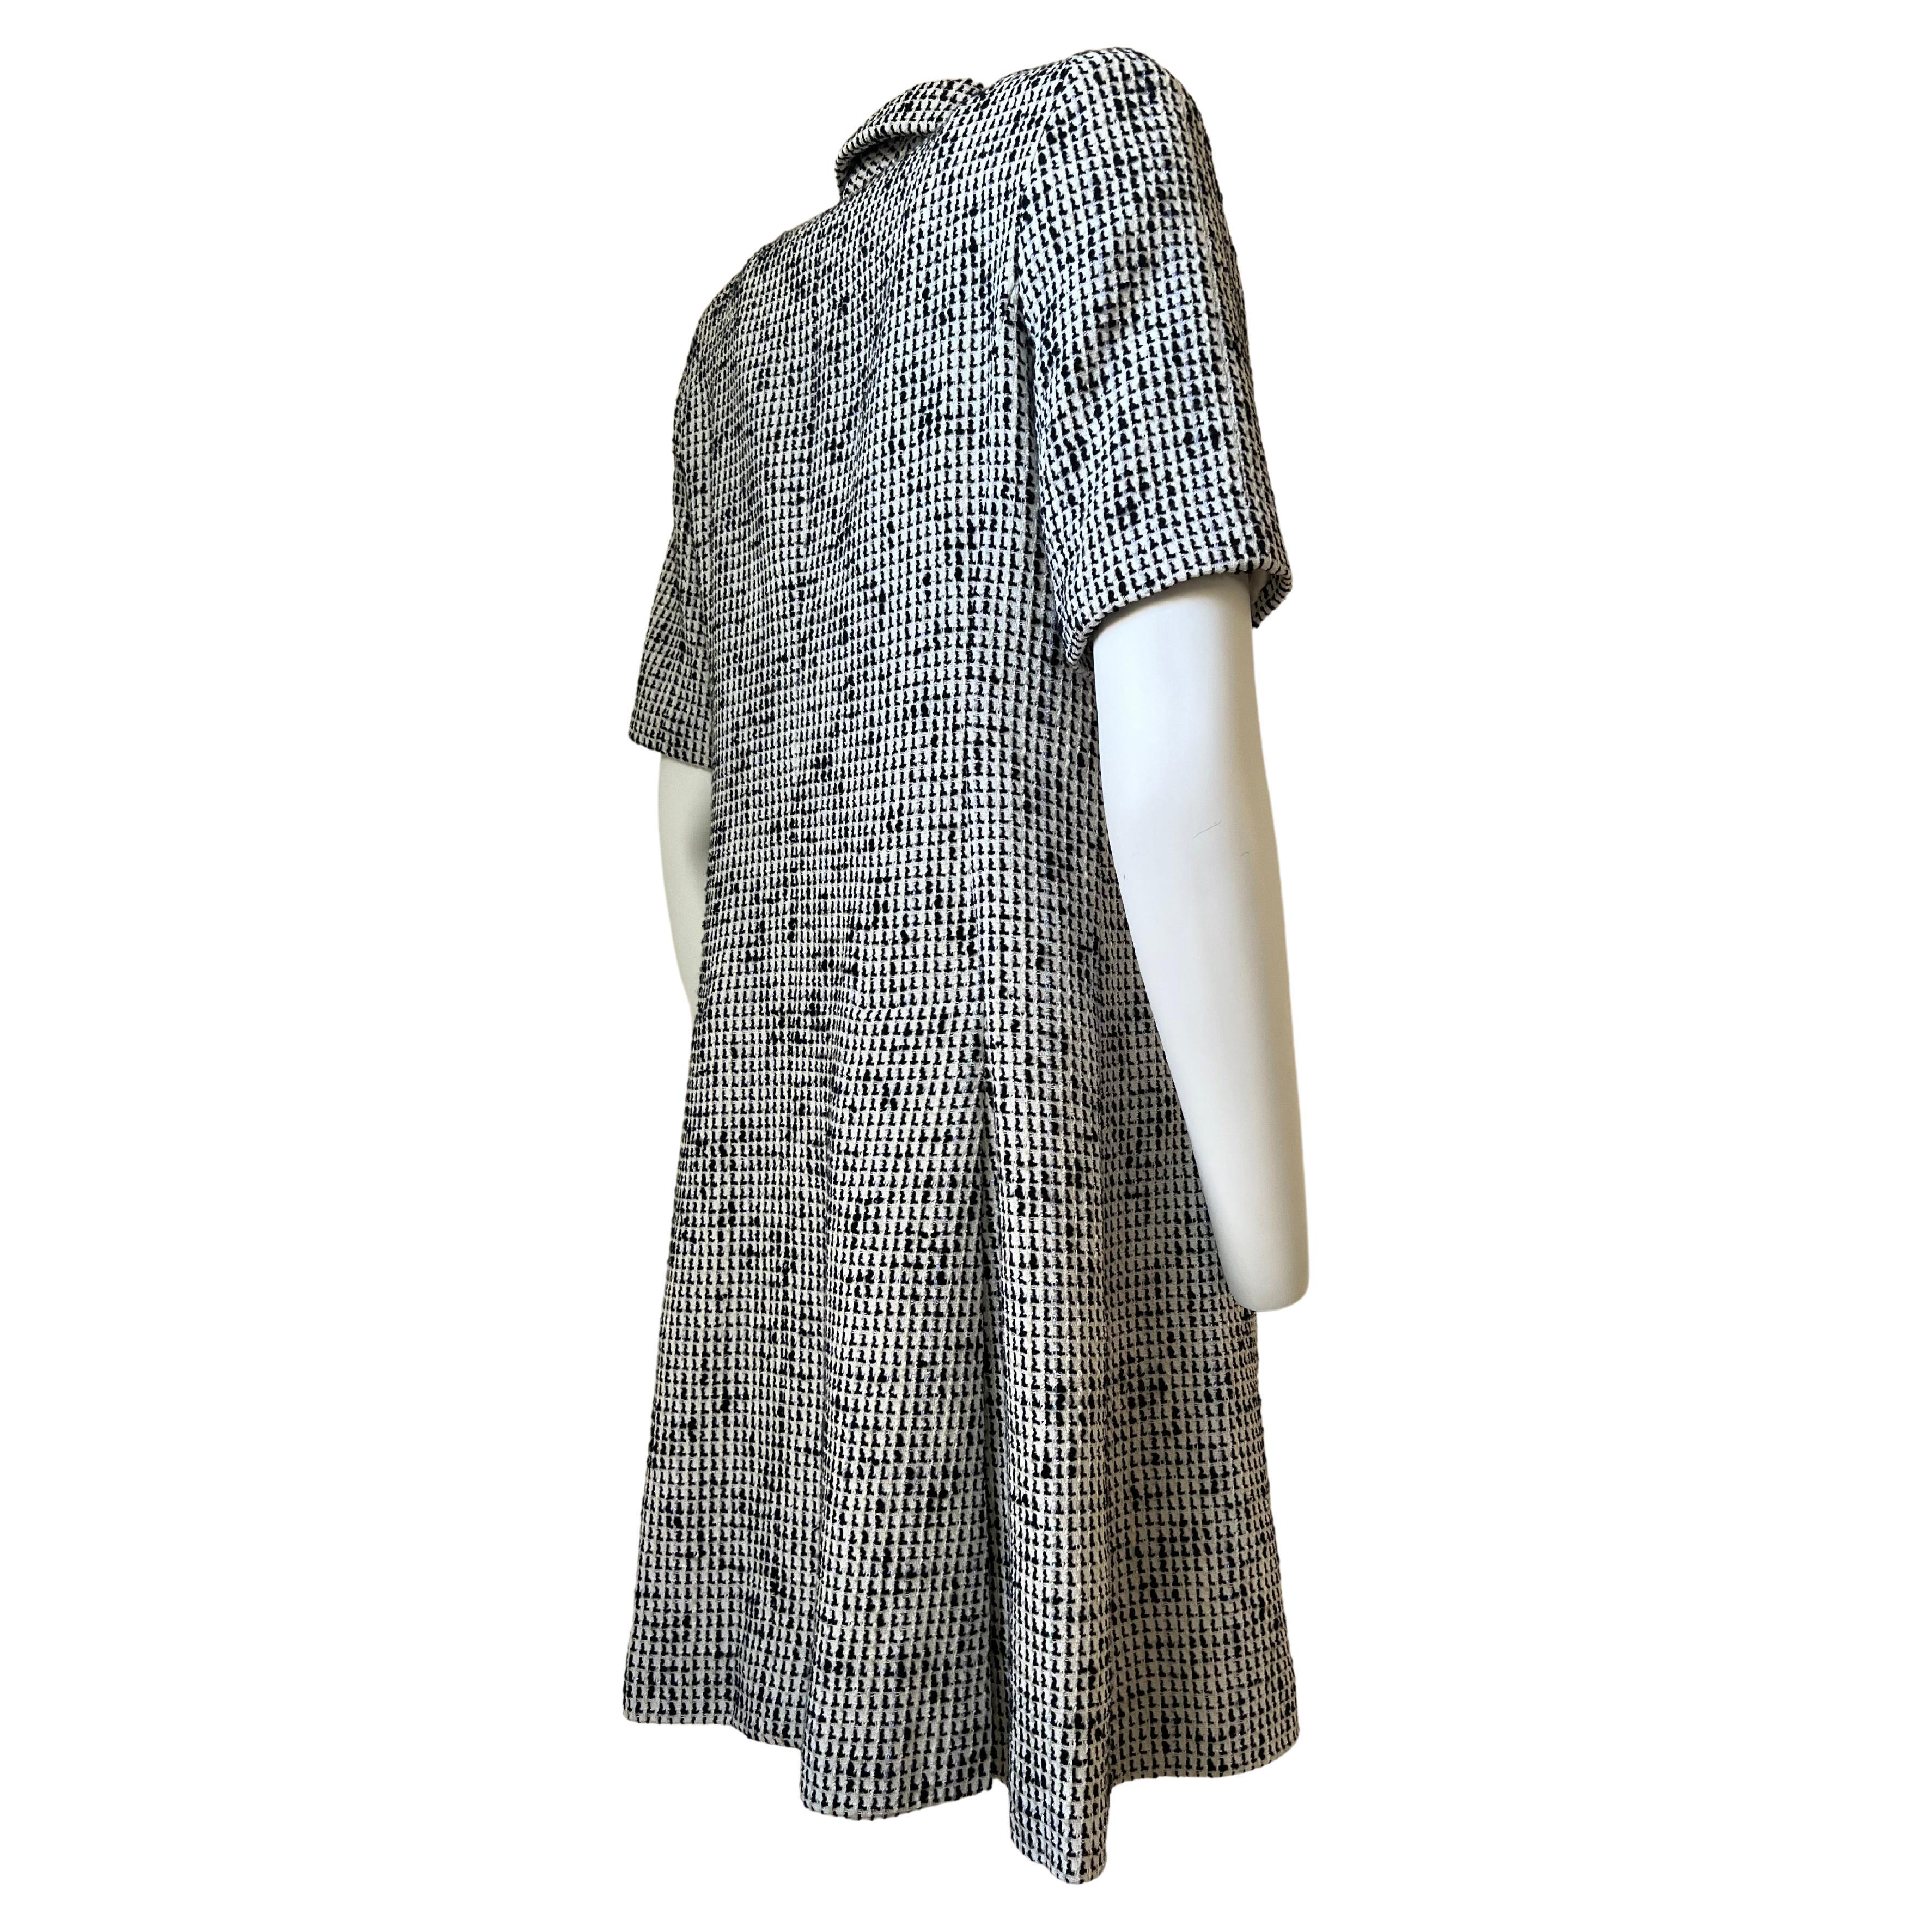 Women's or Men's Chanel Dress Coat Black and White Tweed 2010 For Sale